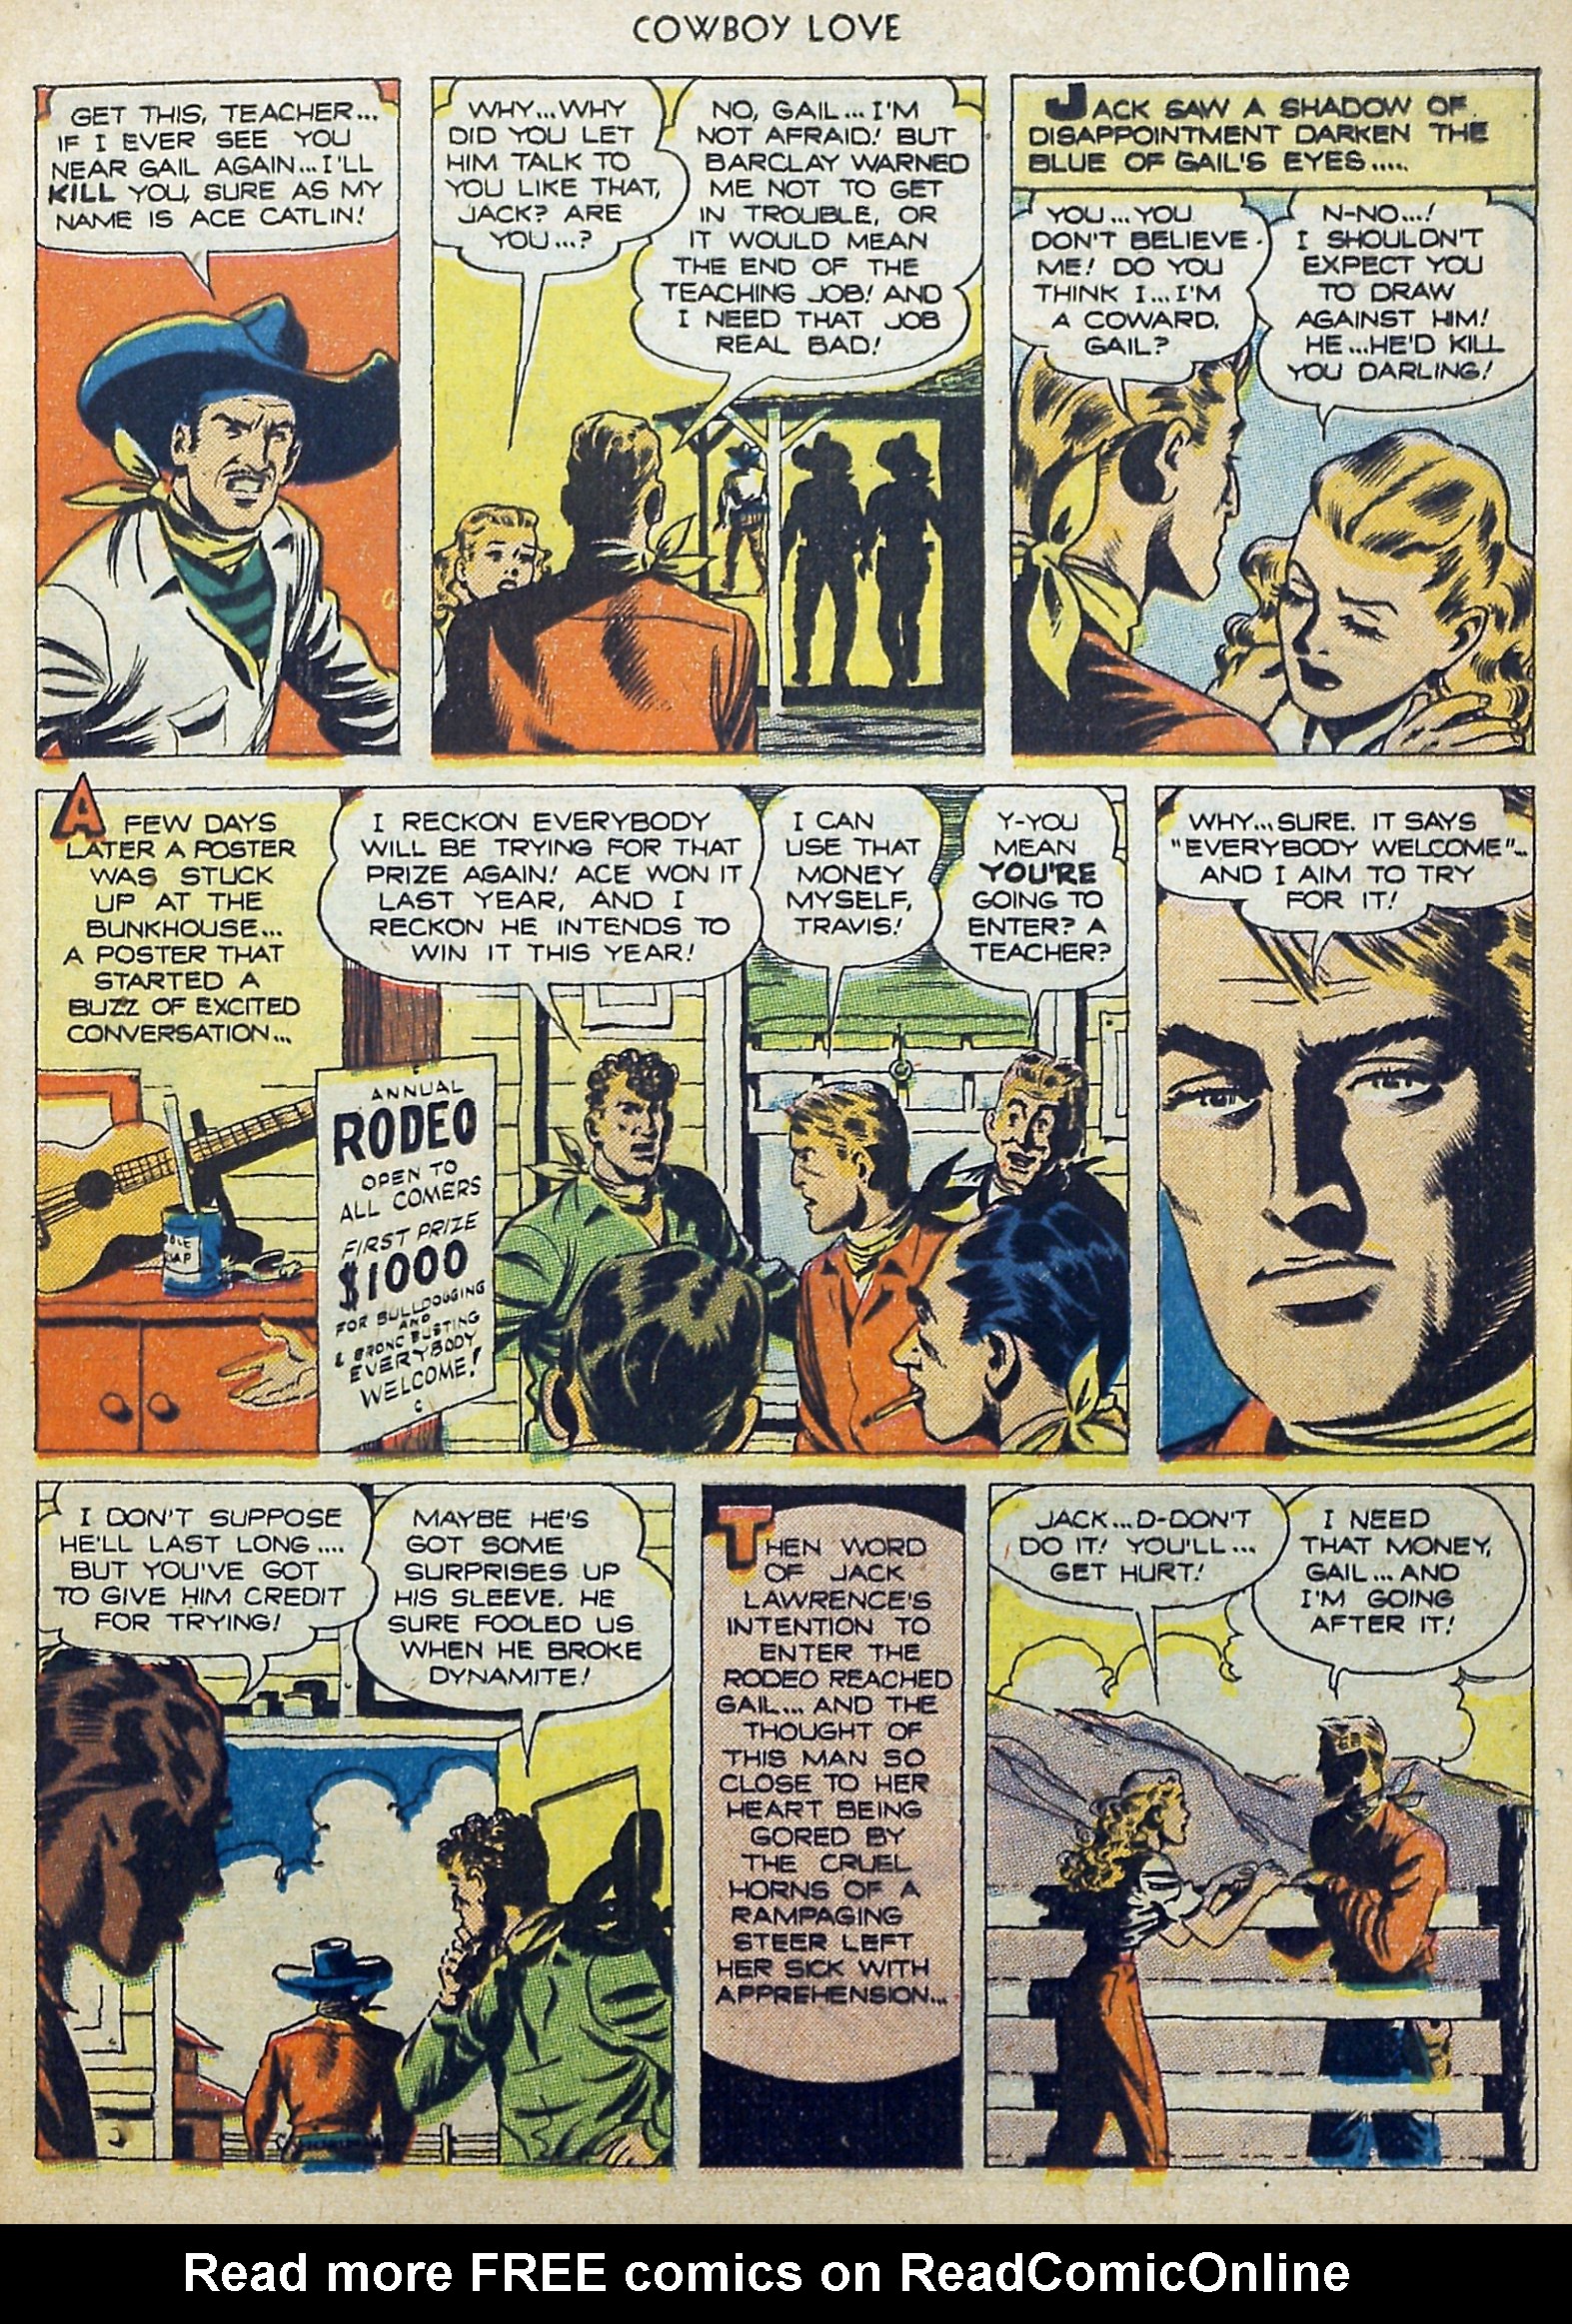 Read online Cowboy Love comic -  Issue #3 - 13